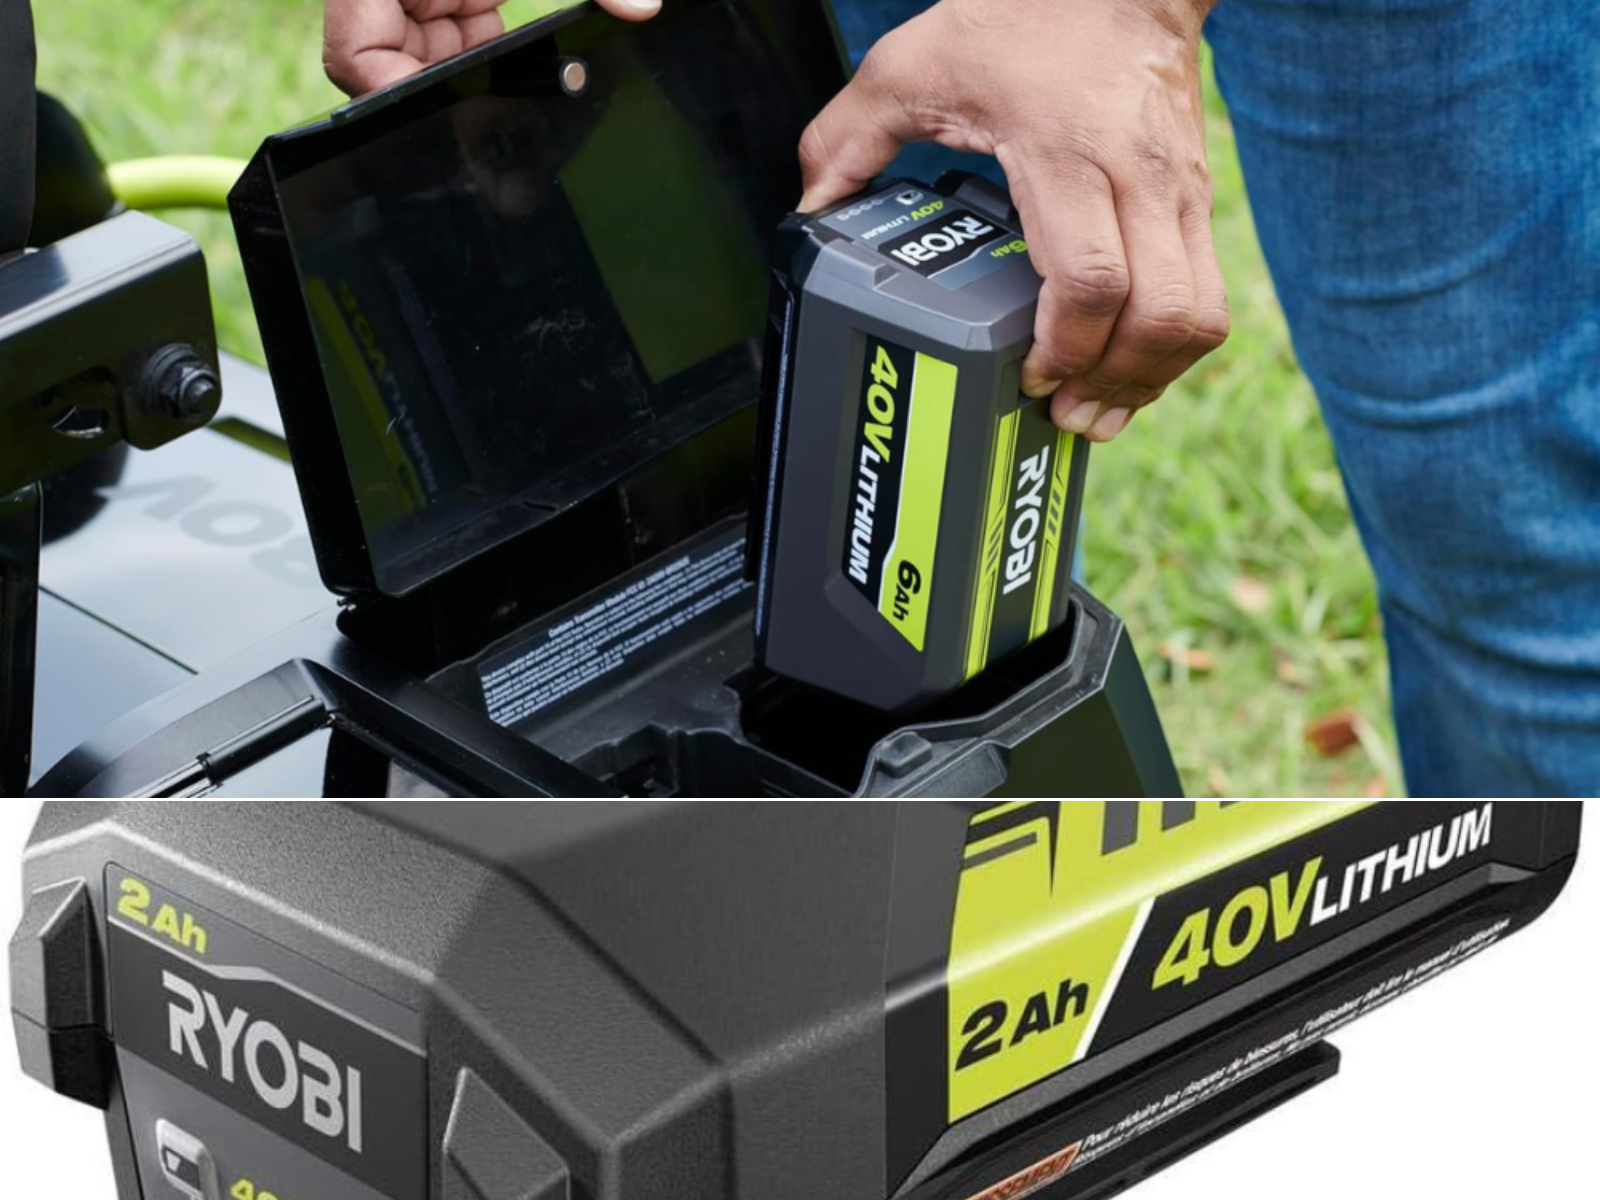 A 2Ah battery and a man placing a 6Ah Ryobi battery in a Ryobi 40v charger